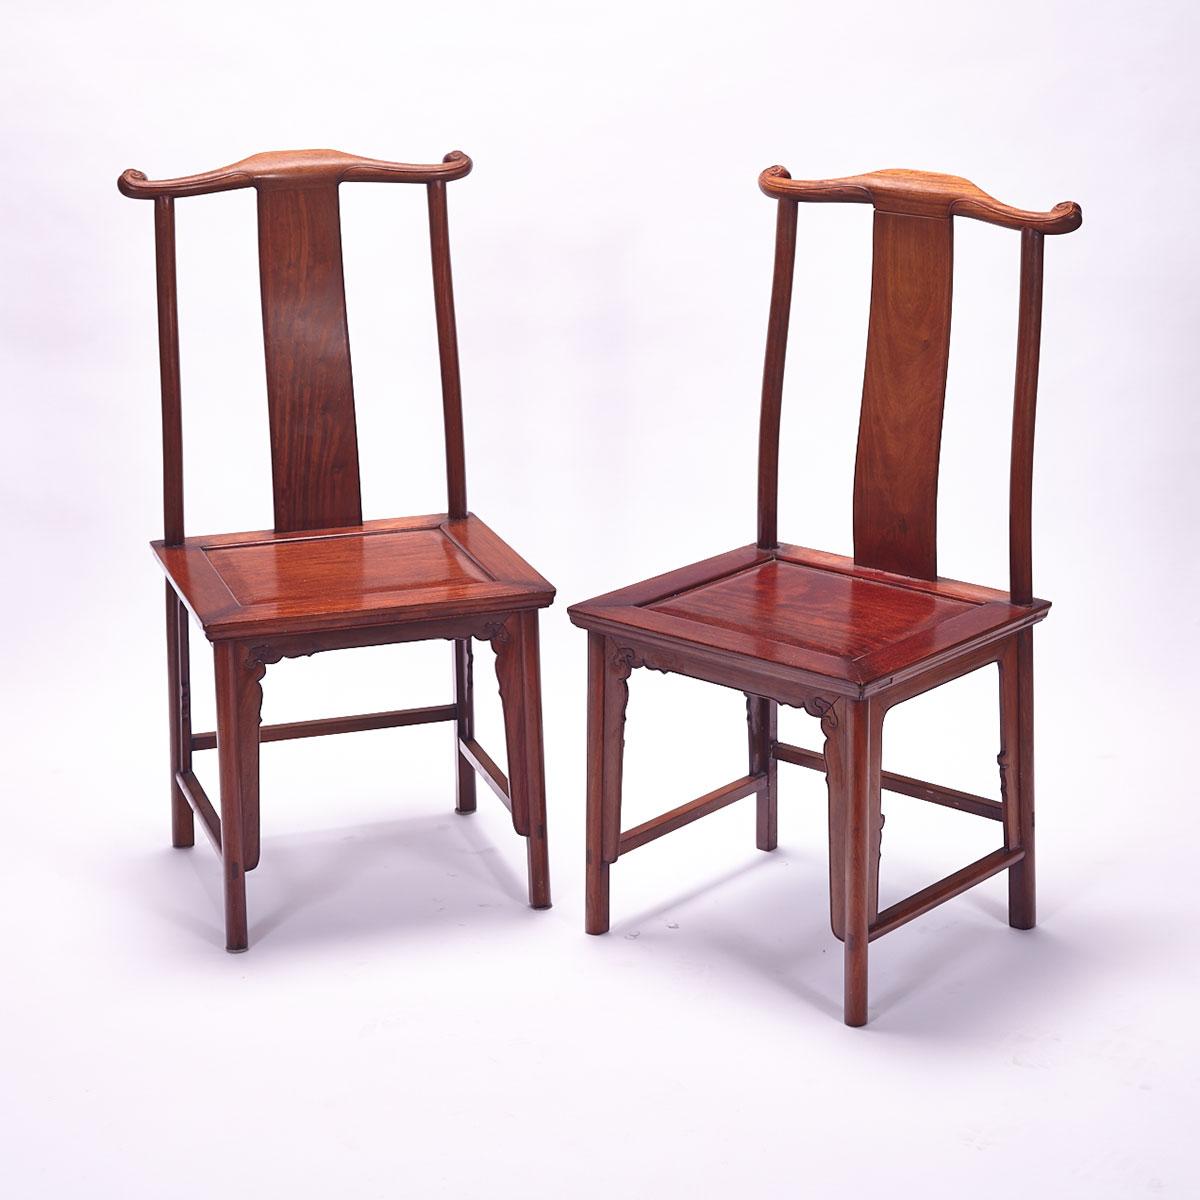 Pair of Rosewood Official’s Hat Chairs, Early 20th Century